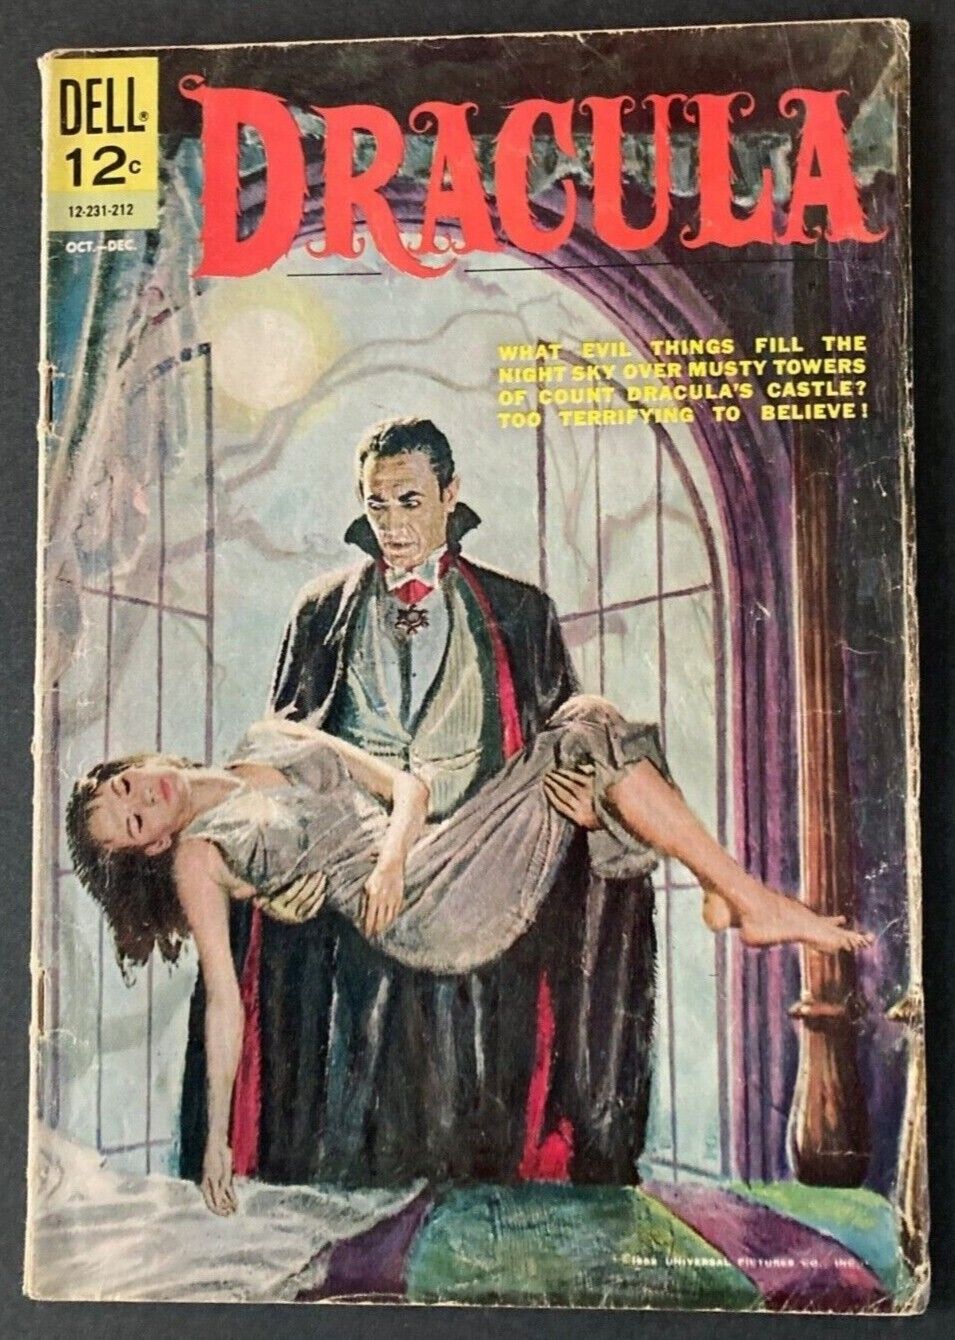 DRACULA, DELL COMIC, Oct-Dec 1962, 12-231-212, UNIVERSAL MONSTERS PAINTED COVER.